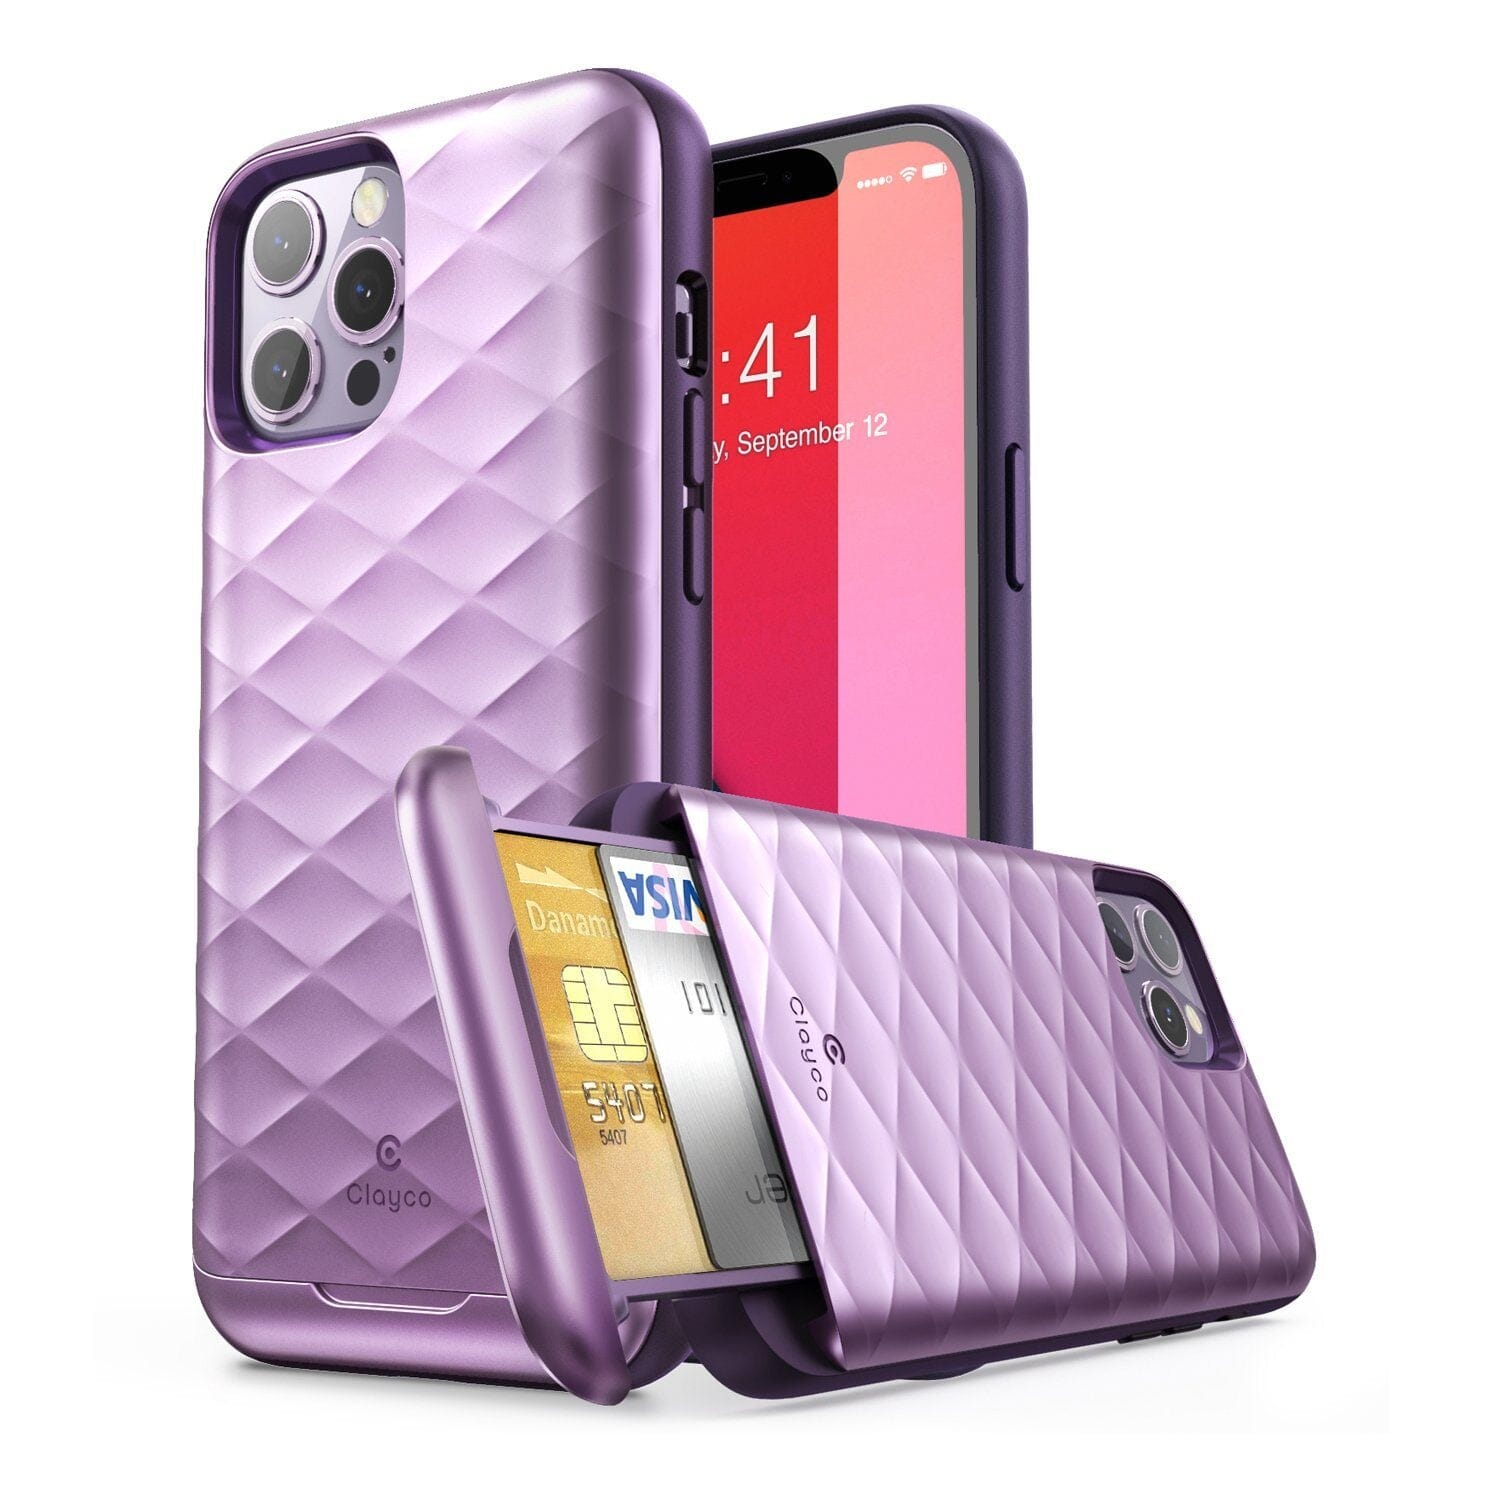 Clayco Argos Series Hybrid Protective Wallet Case for iPhone 12 Pro Max 6.7"/ 12/12 Pro 6.1"(2020) Built-in Credit Card/ID Card Slot, Black iPhone 12 Series Clayco iPhone 12 Pro Max 6.7" Purple 